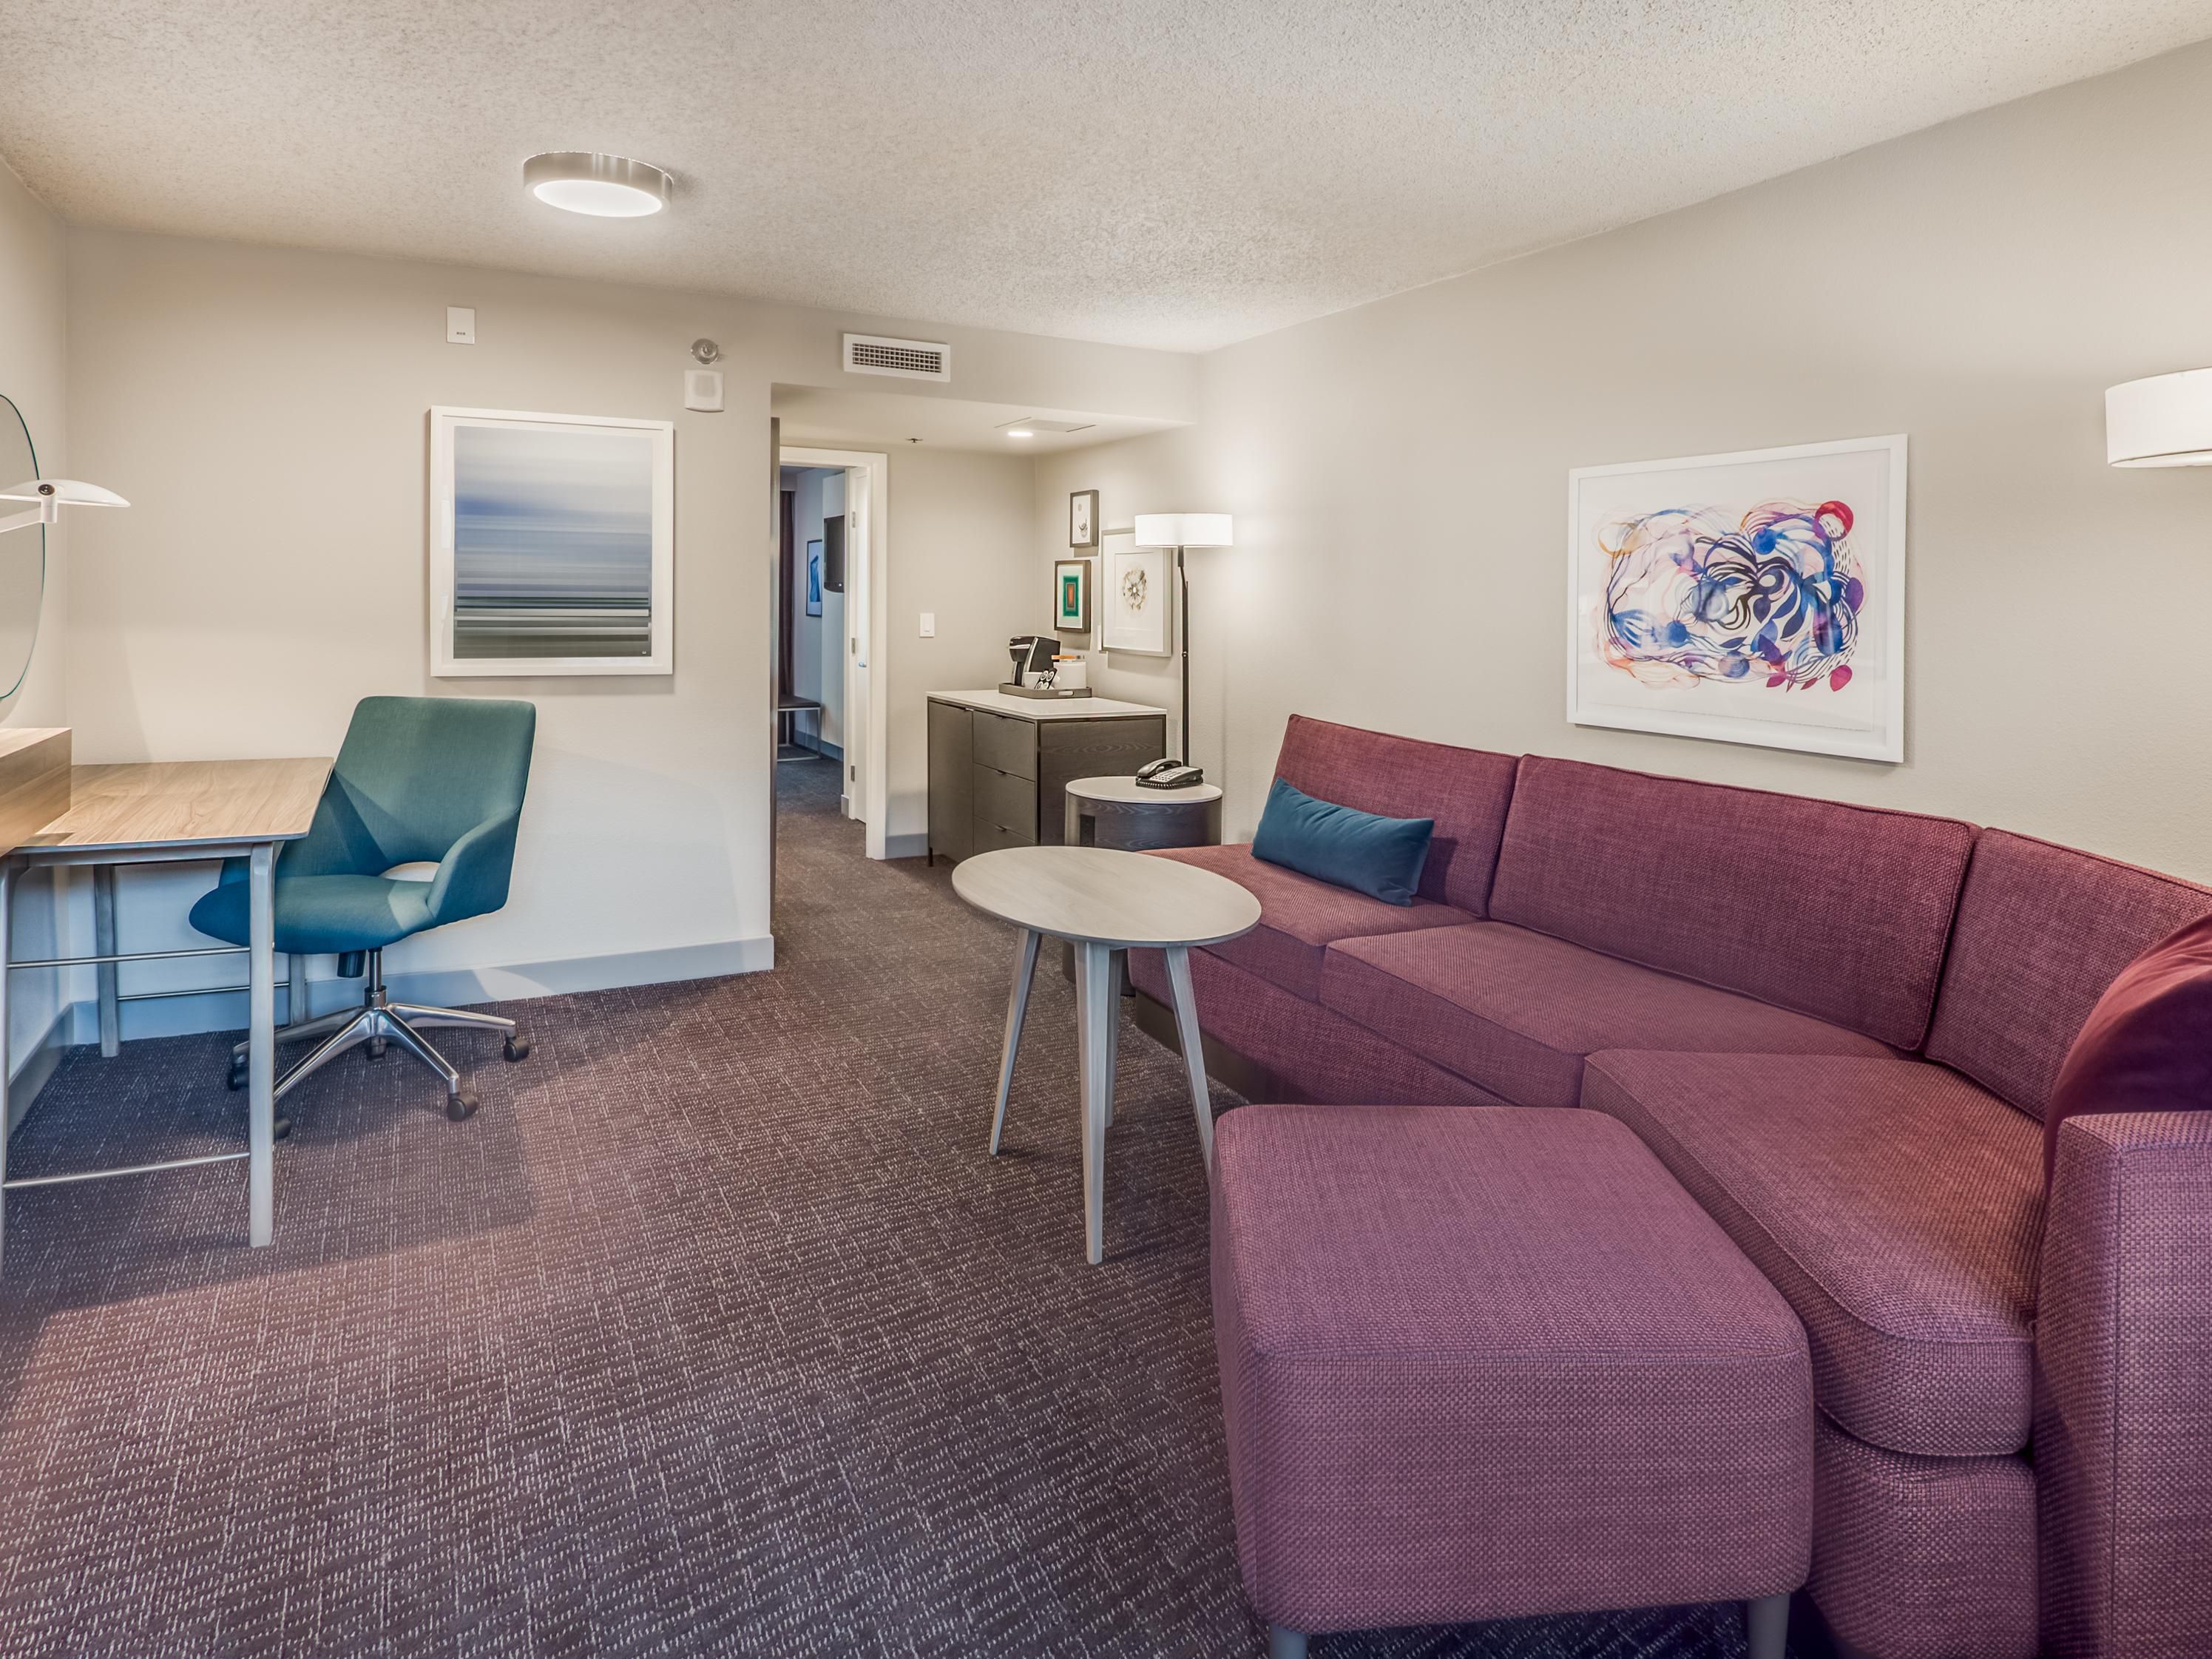 Our Arlington, TX hotel with a pool underwent an extensive renovation in 2021. From bathrooms to décor, every detail has been carefully updated. Each guest room now features a high-end, full-size, pull-out sleeper sofa. Relax on the sofa during the day and turn it into a plush bed at night.  